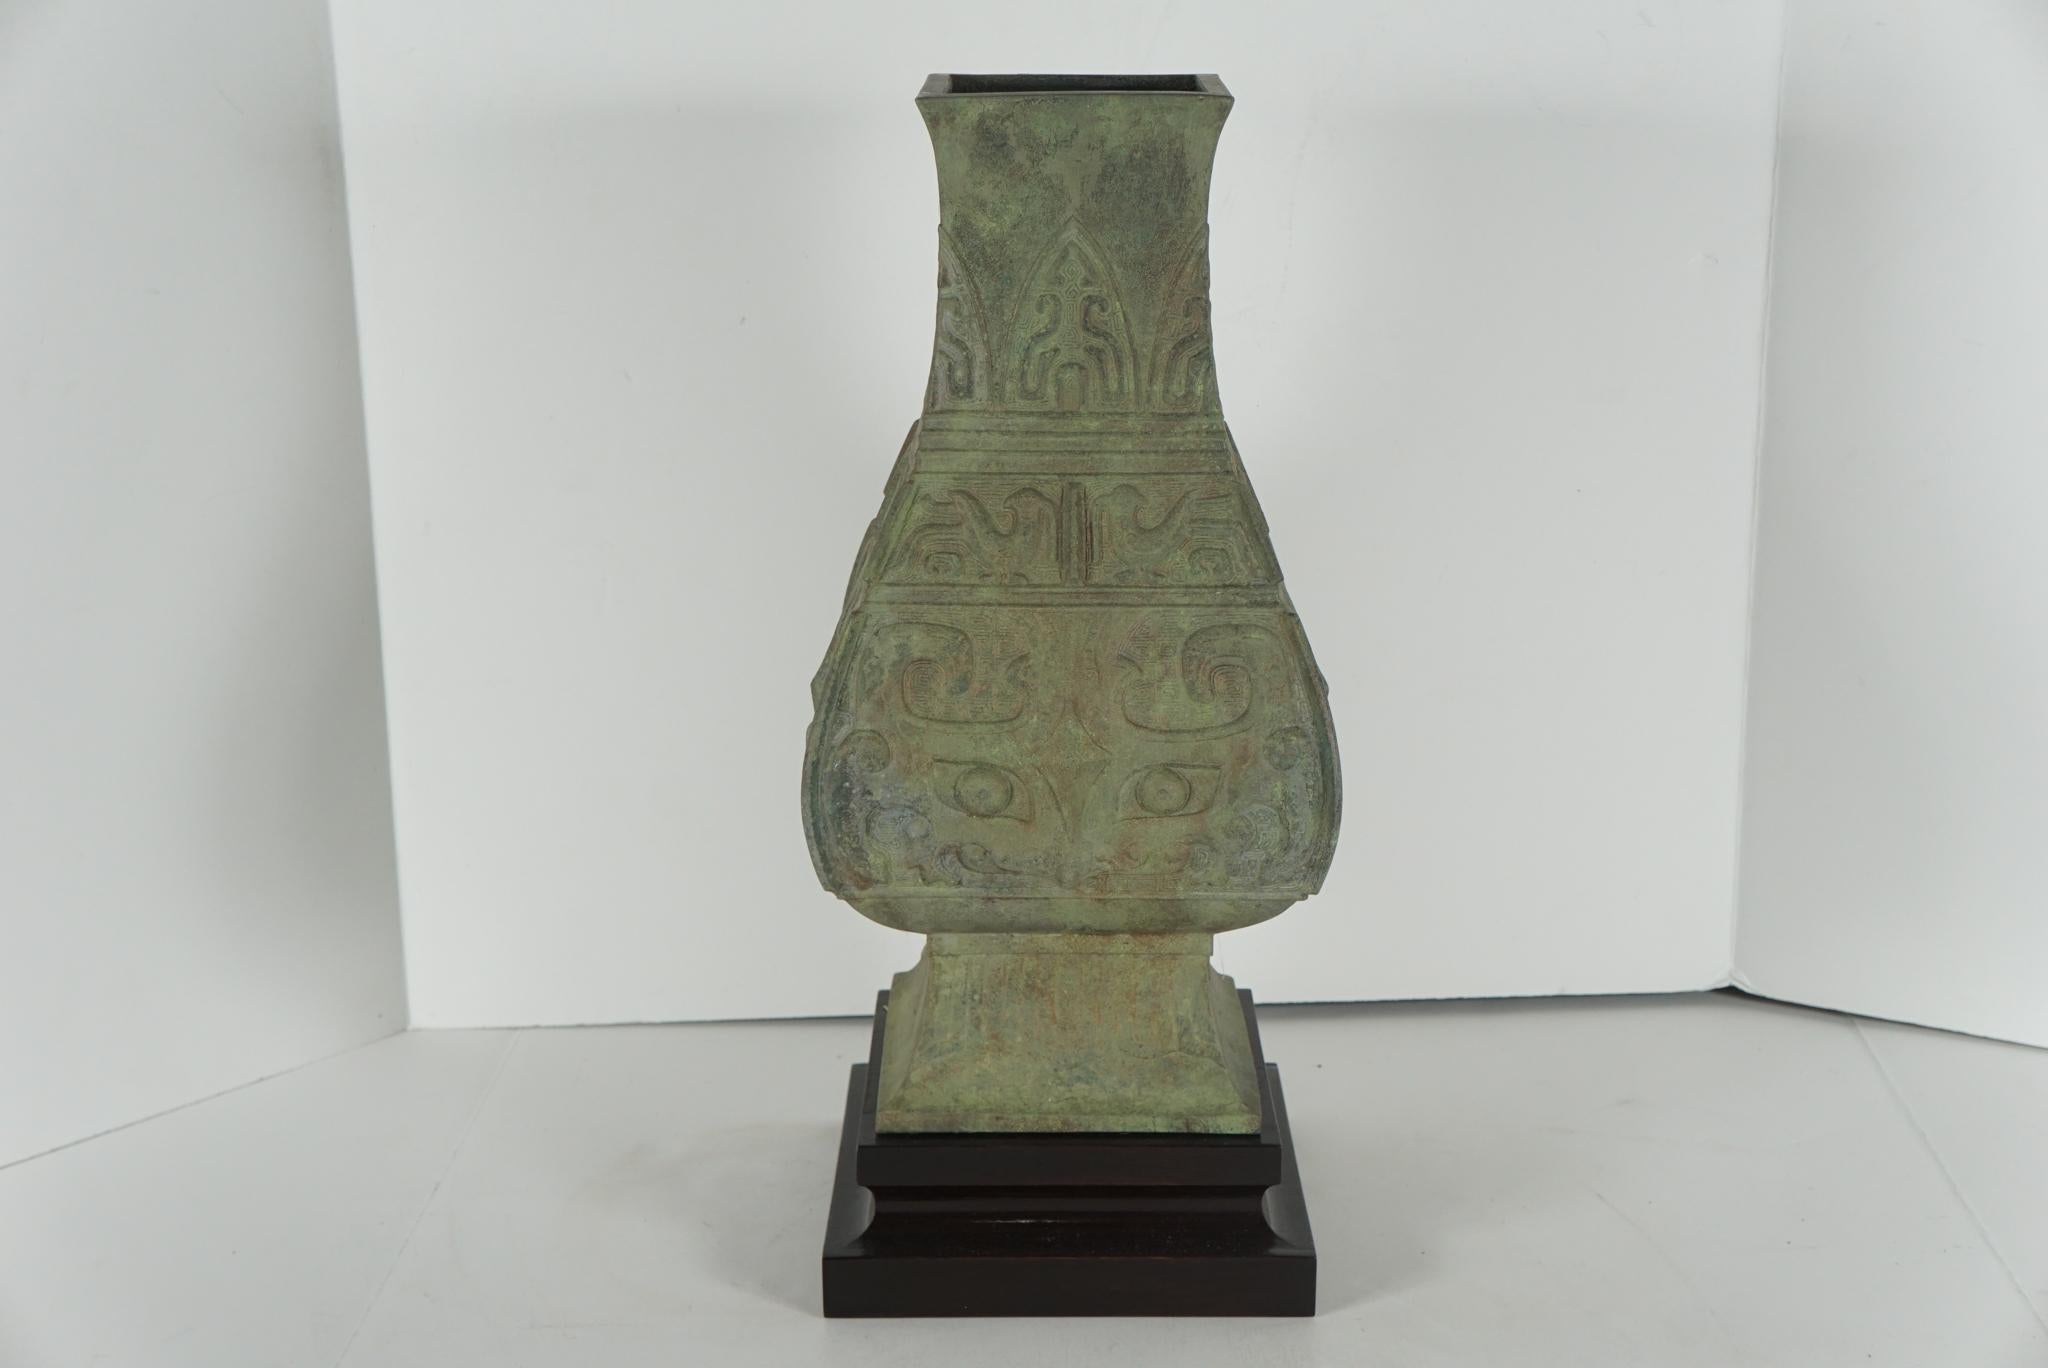 This archaistic Hu form bronze vessel was made in the Republic period just following the end of Chinese Imperial rule. Cast as an honorific venerable object by workers still in possession of ideals from the imperial times. This period shows the